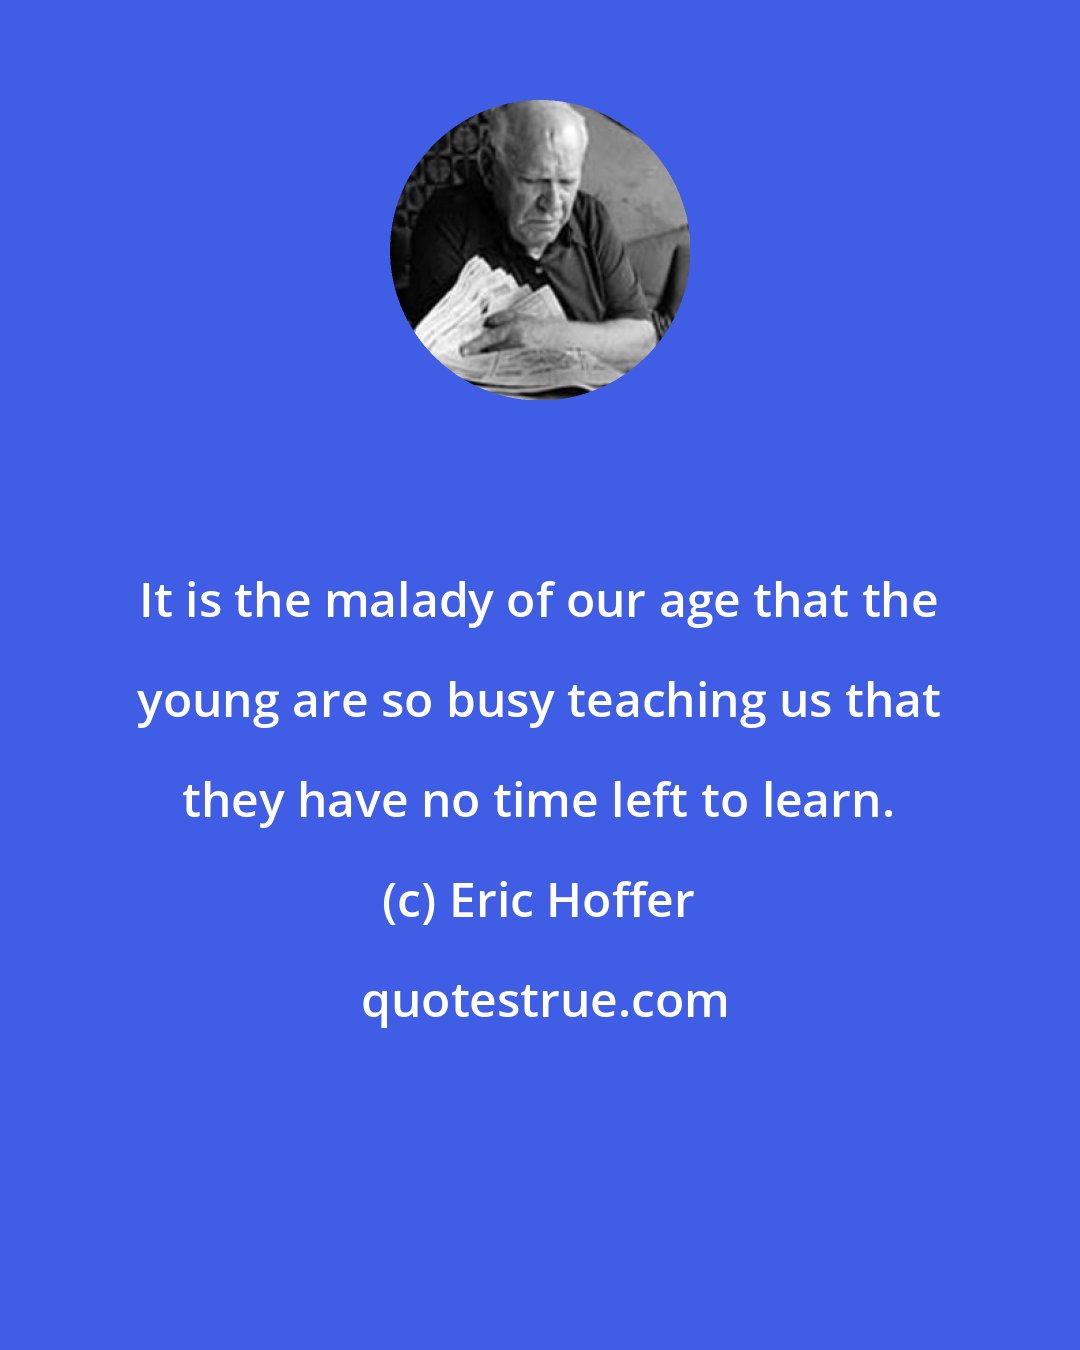 Eric Hoffer: It is the malady of our age that the young are so busy teaching us that they have no time left to learn.